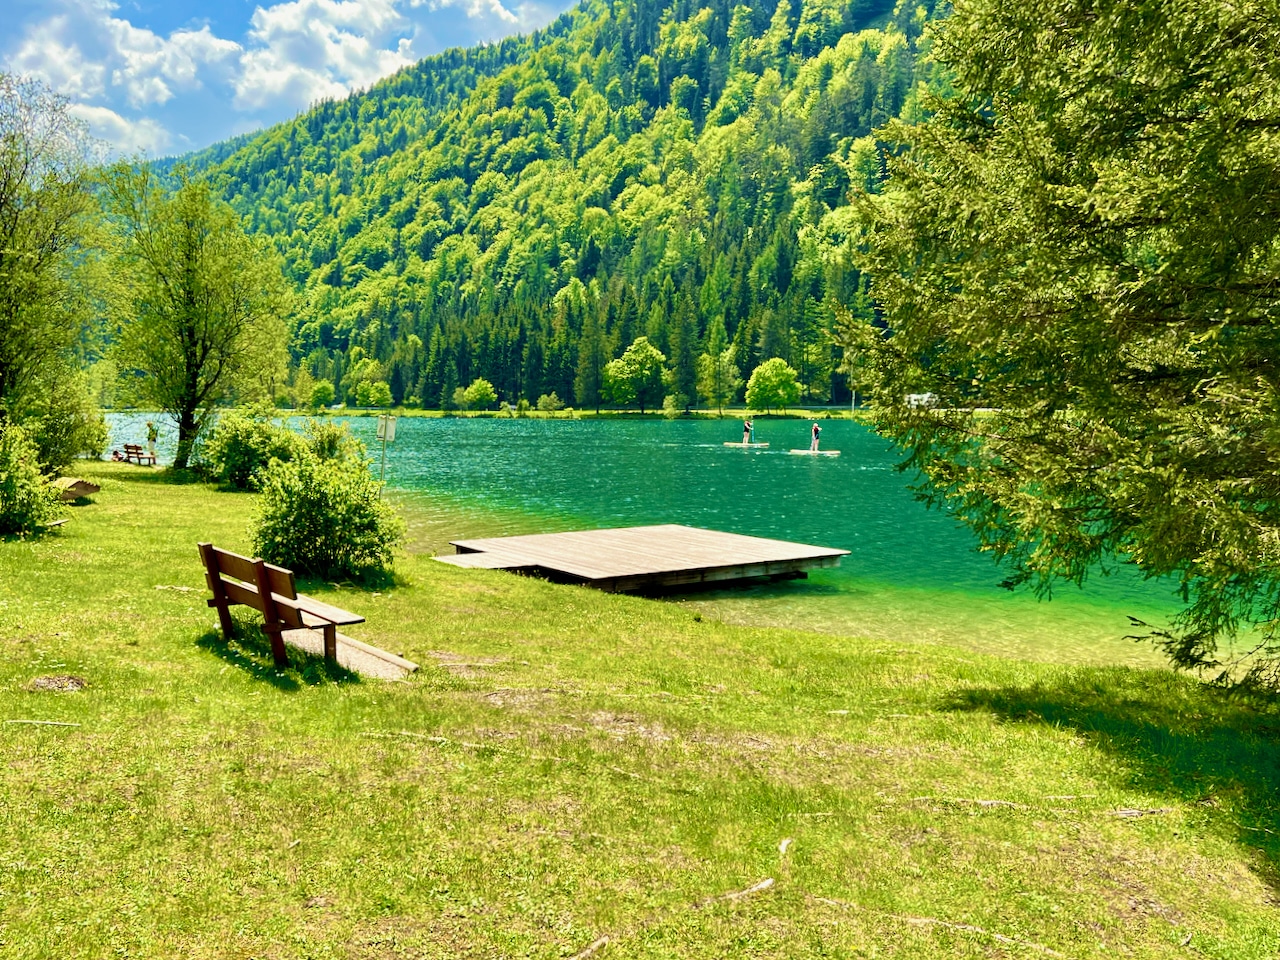 There's still a seat on the jetty - maybe it's your place of well-being in summer at Pillersee? Travel Report Fieberbrunn Pillerseetal experiences tips sights activities